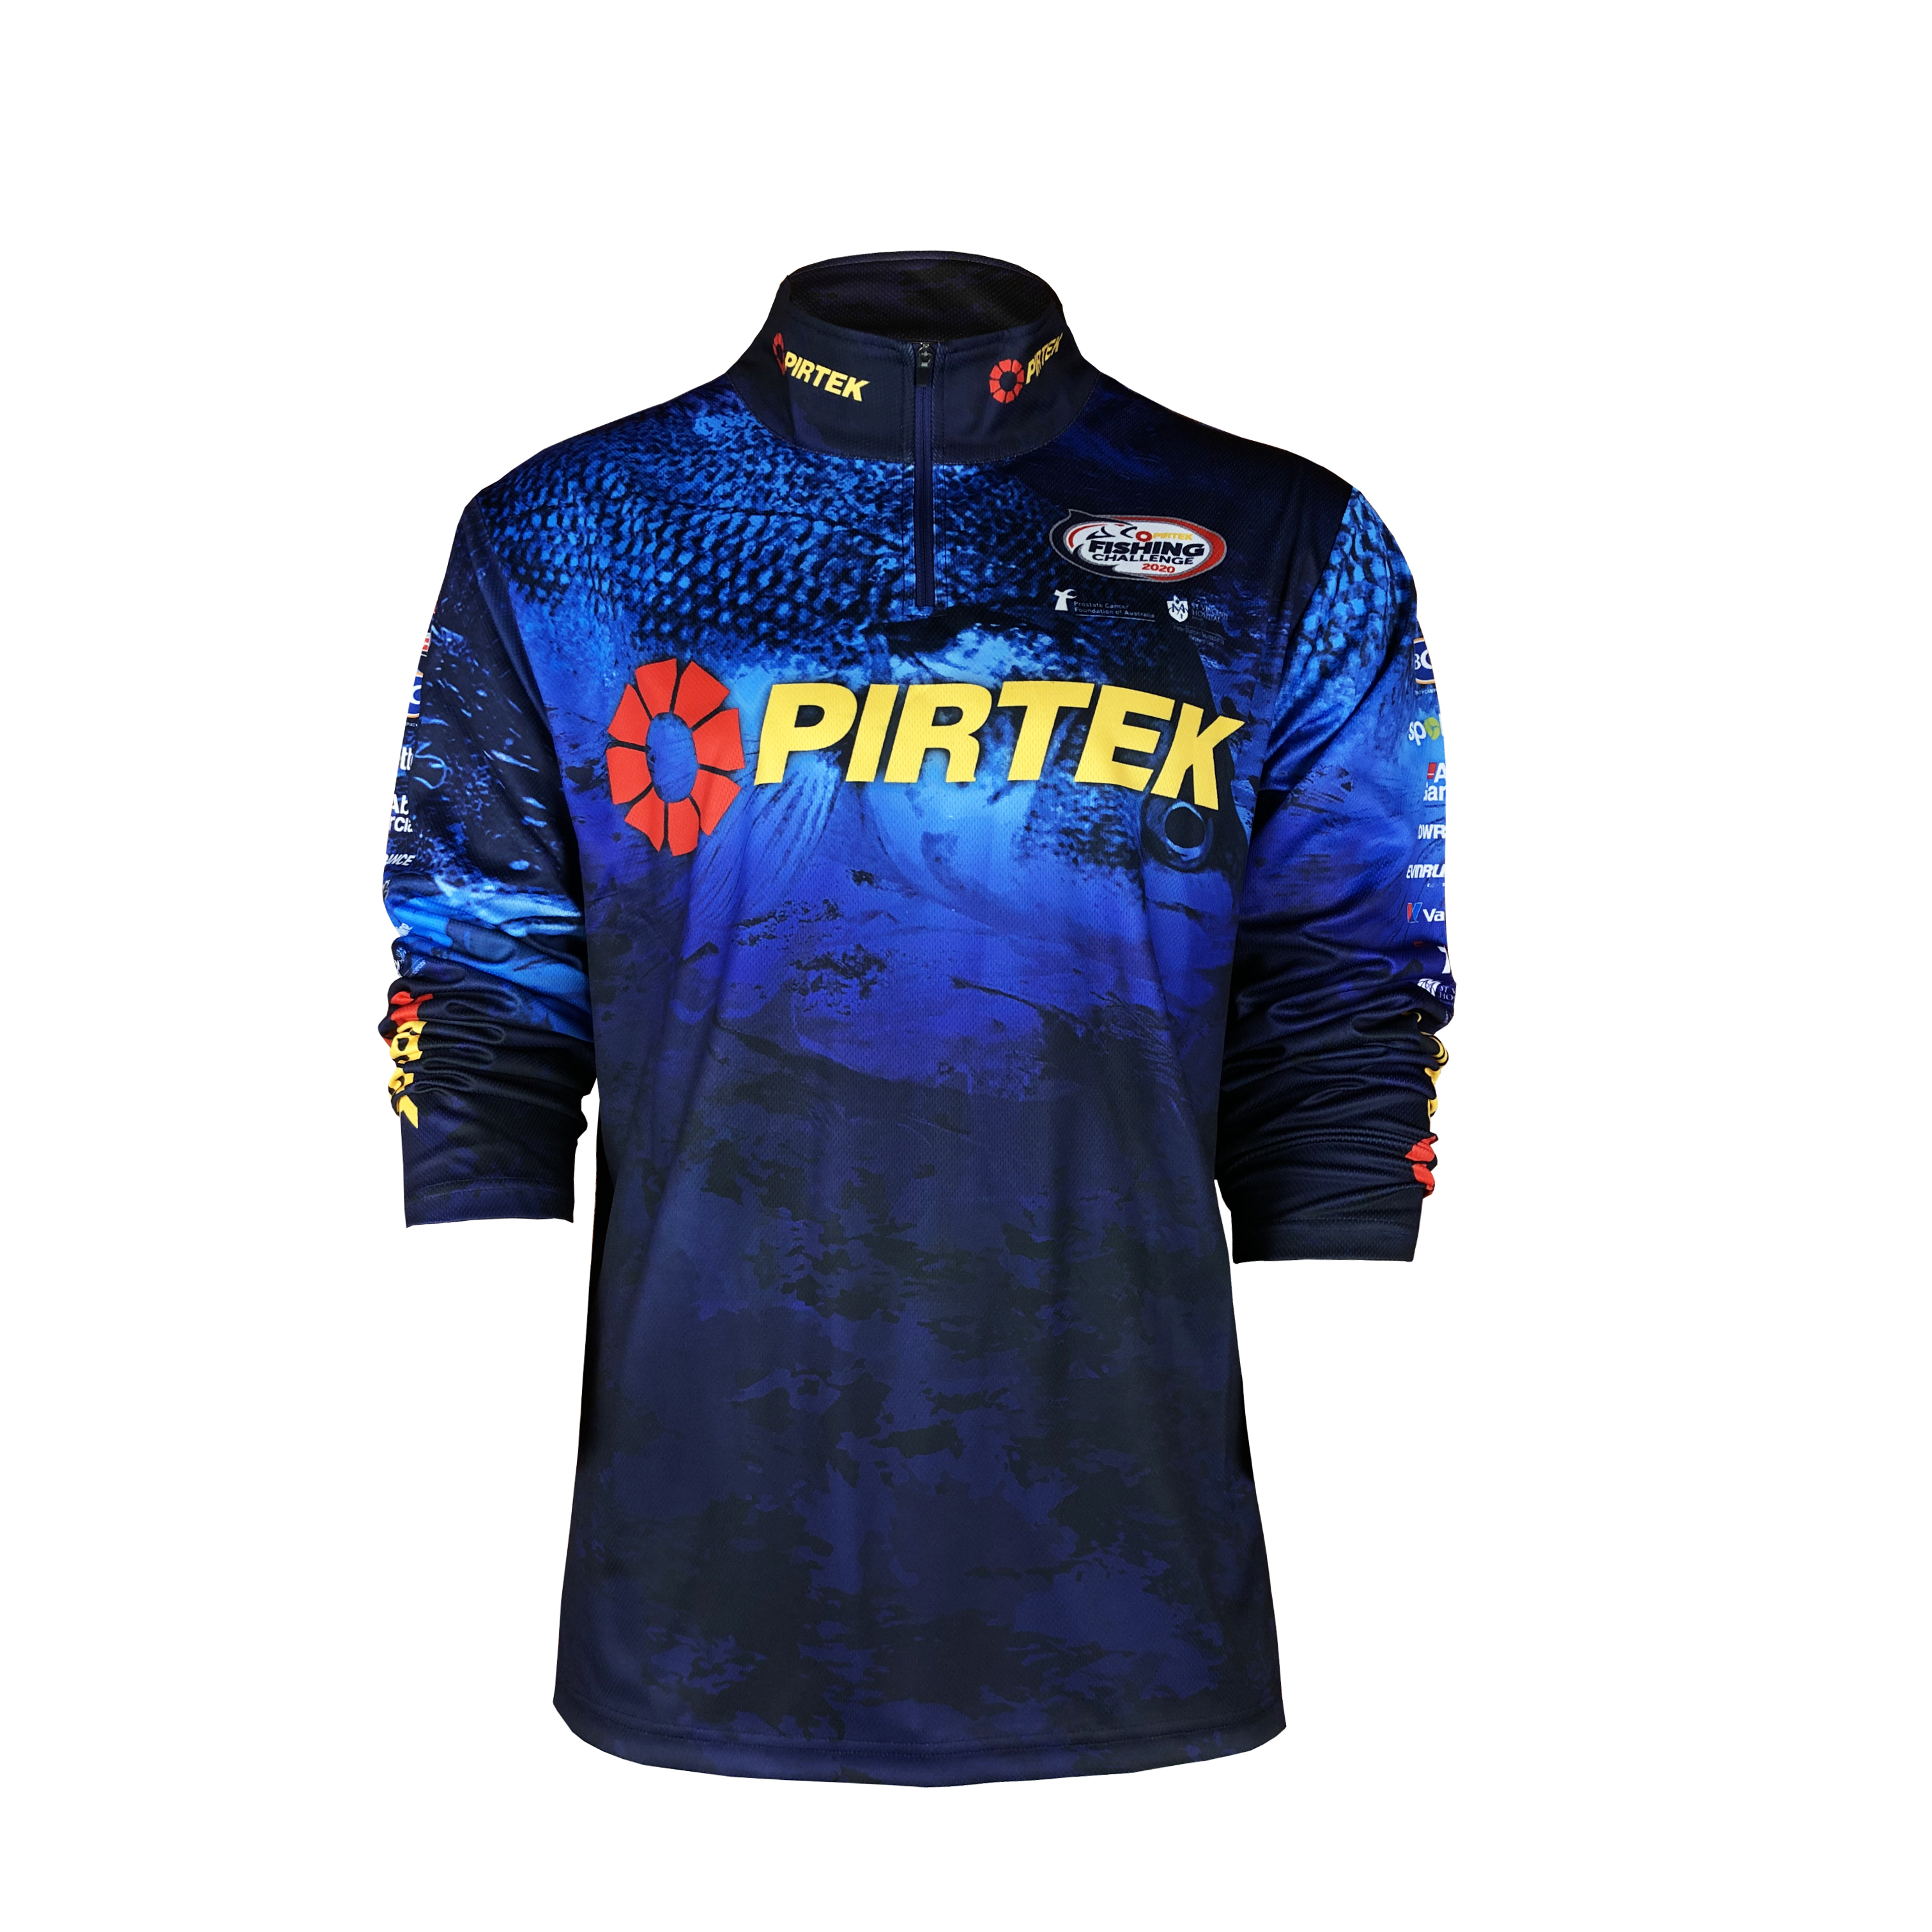 Reel In Success With Custom Fishing Jerseys: Enhance Team Spirit And Performance